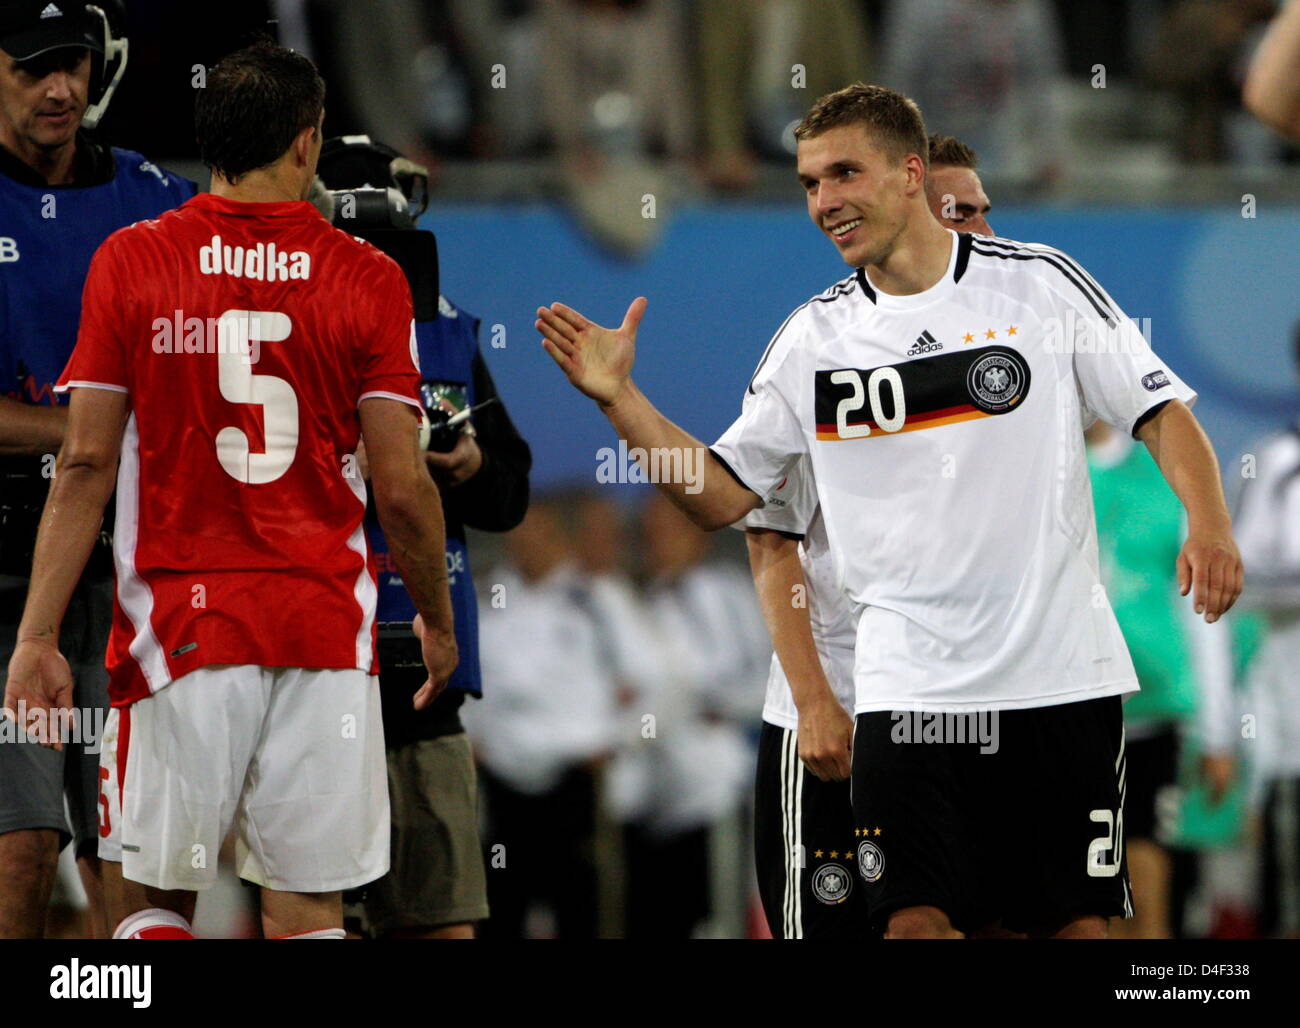 Lukas Podolski of Germany (R) shakes hands with Dariusz Dudka of Poland after the EURO 2008 preliminary round group B match in Woerthersee Stadium, Klagenfurt, Austria, 08 June 2008. Germany won 2:0. Photo: Oliver Berg dpa +please note UEFA restrictions particularly in regard to slide shows and 'No Mobile Services'+ +++(c) dpa - Bildfunk+++ Stock Photo